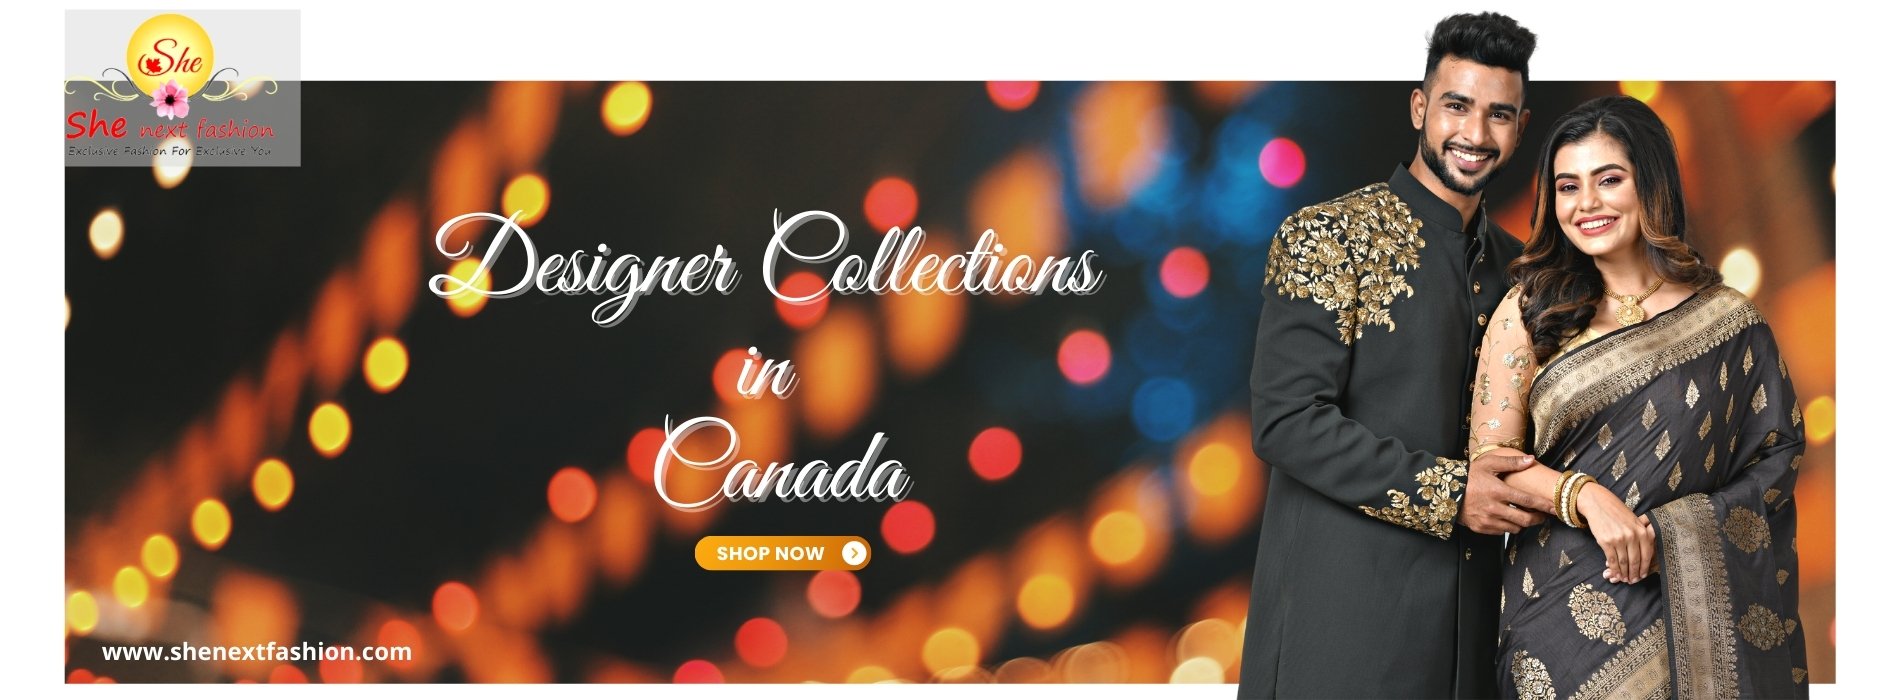 designer-collections-in-canada